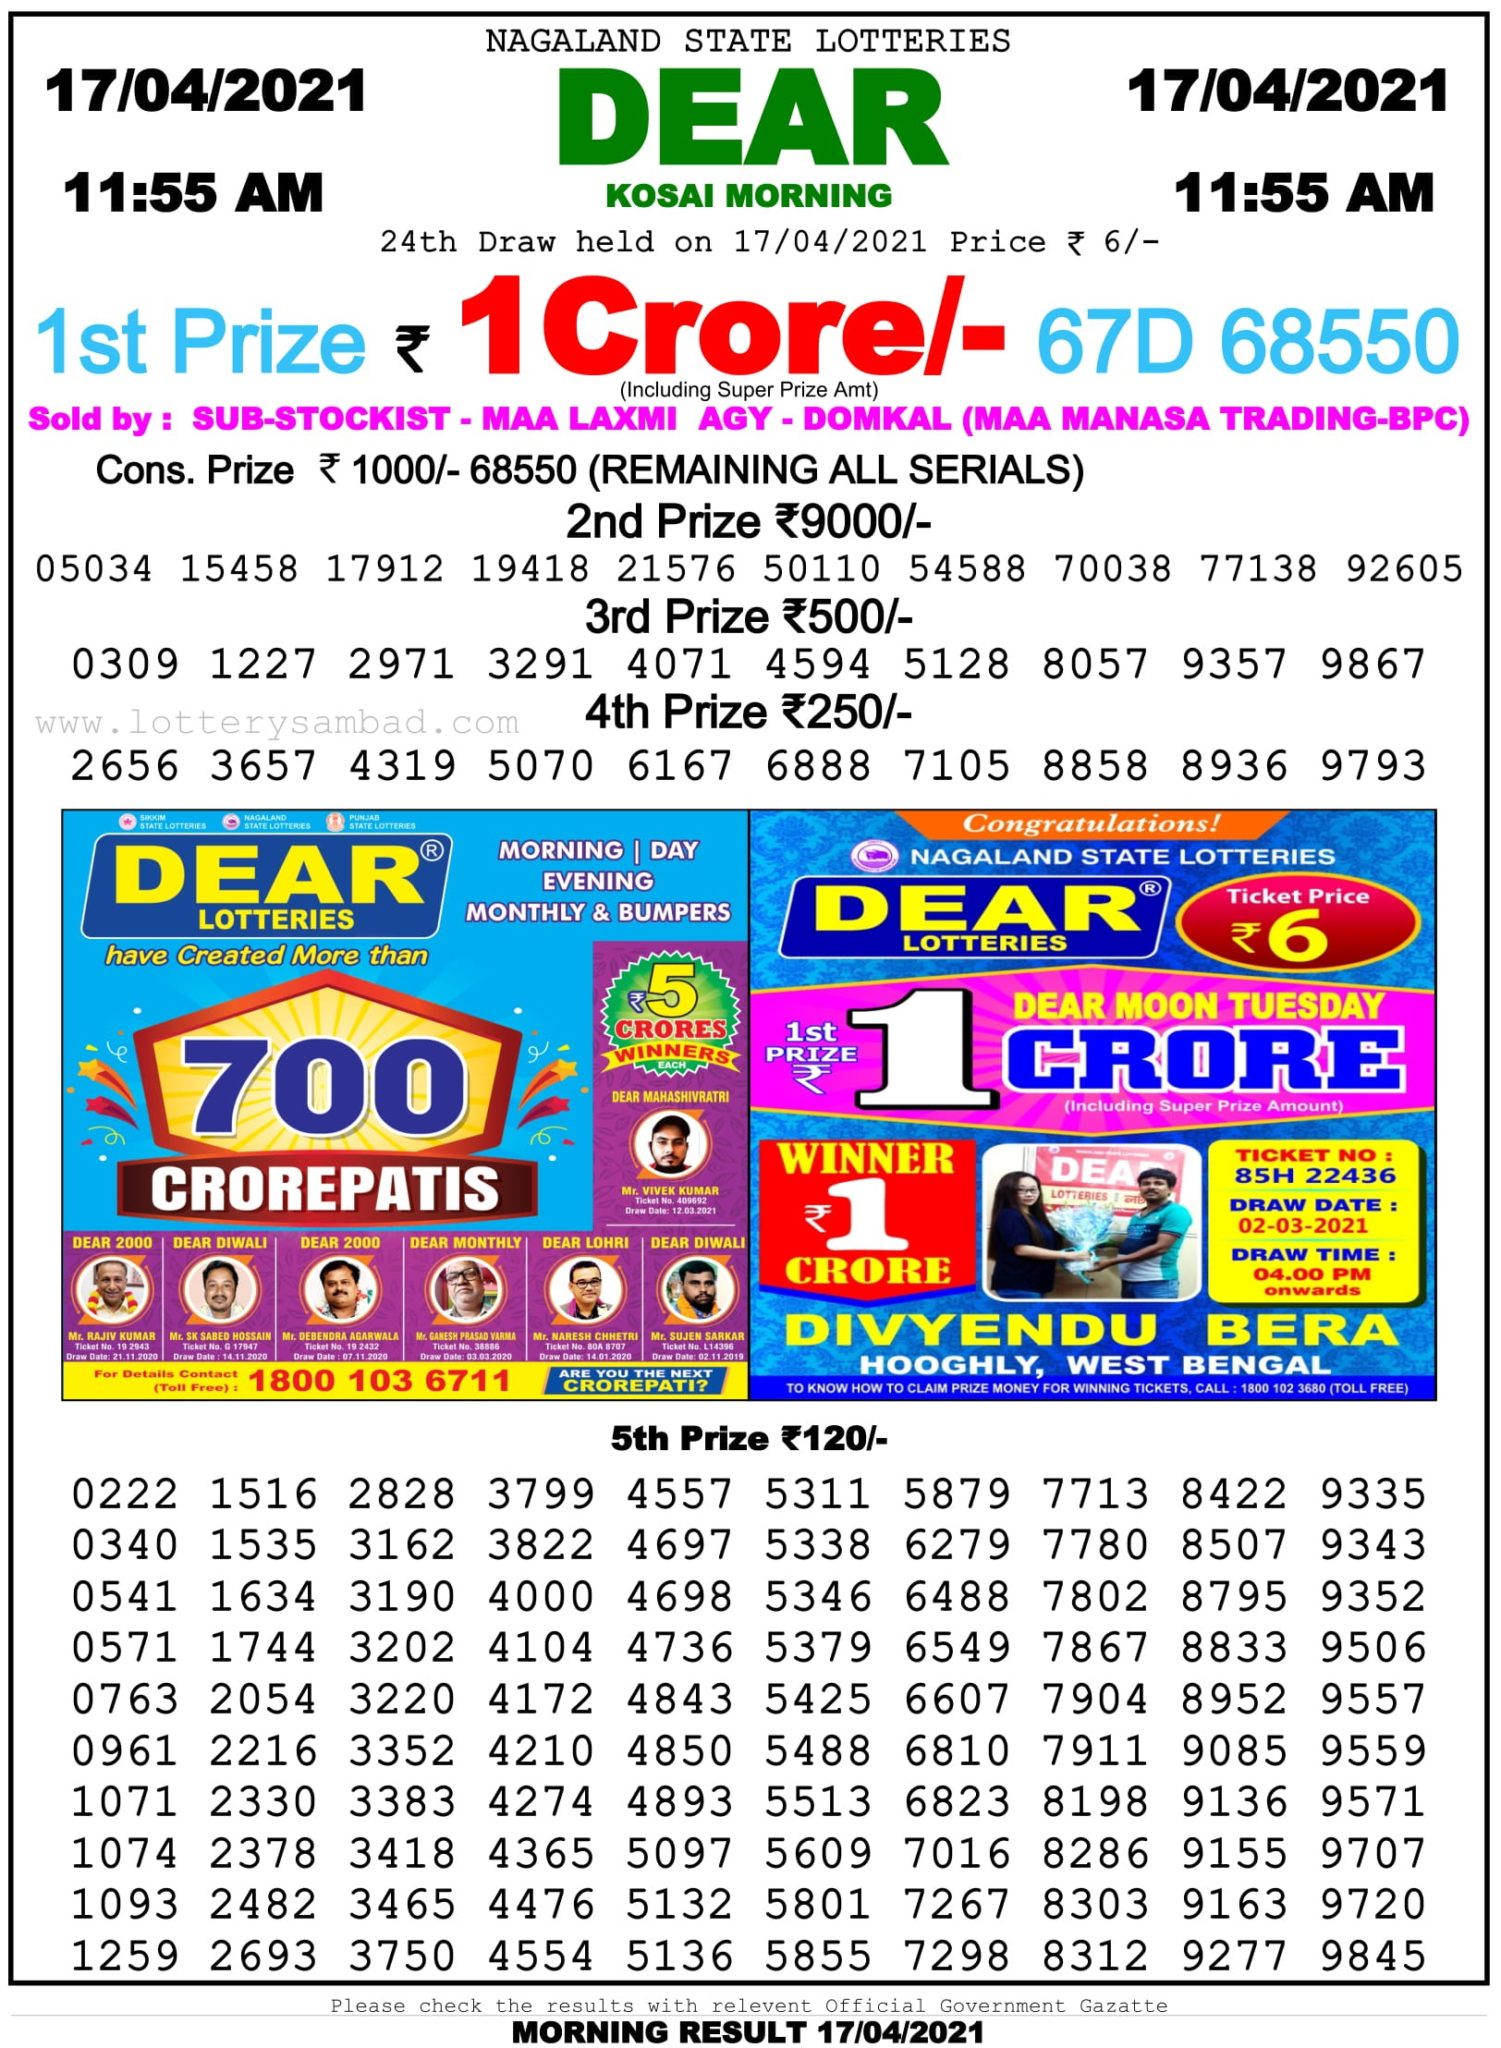 Dear Daily Lottery Result 11.55AM 17 Apr 2021